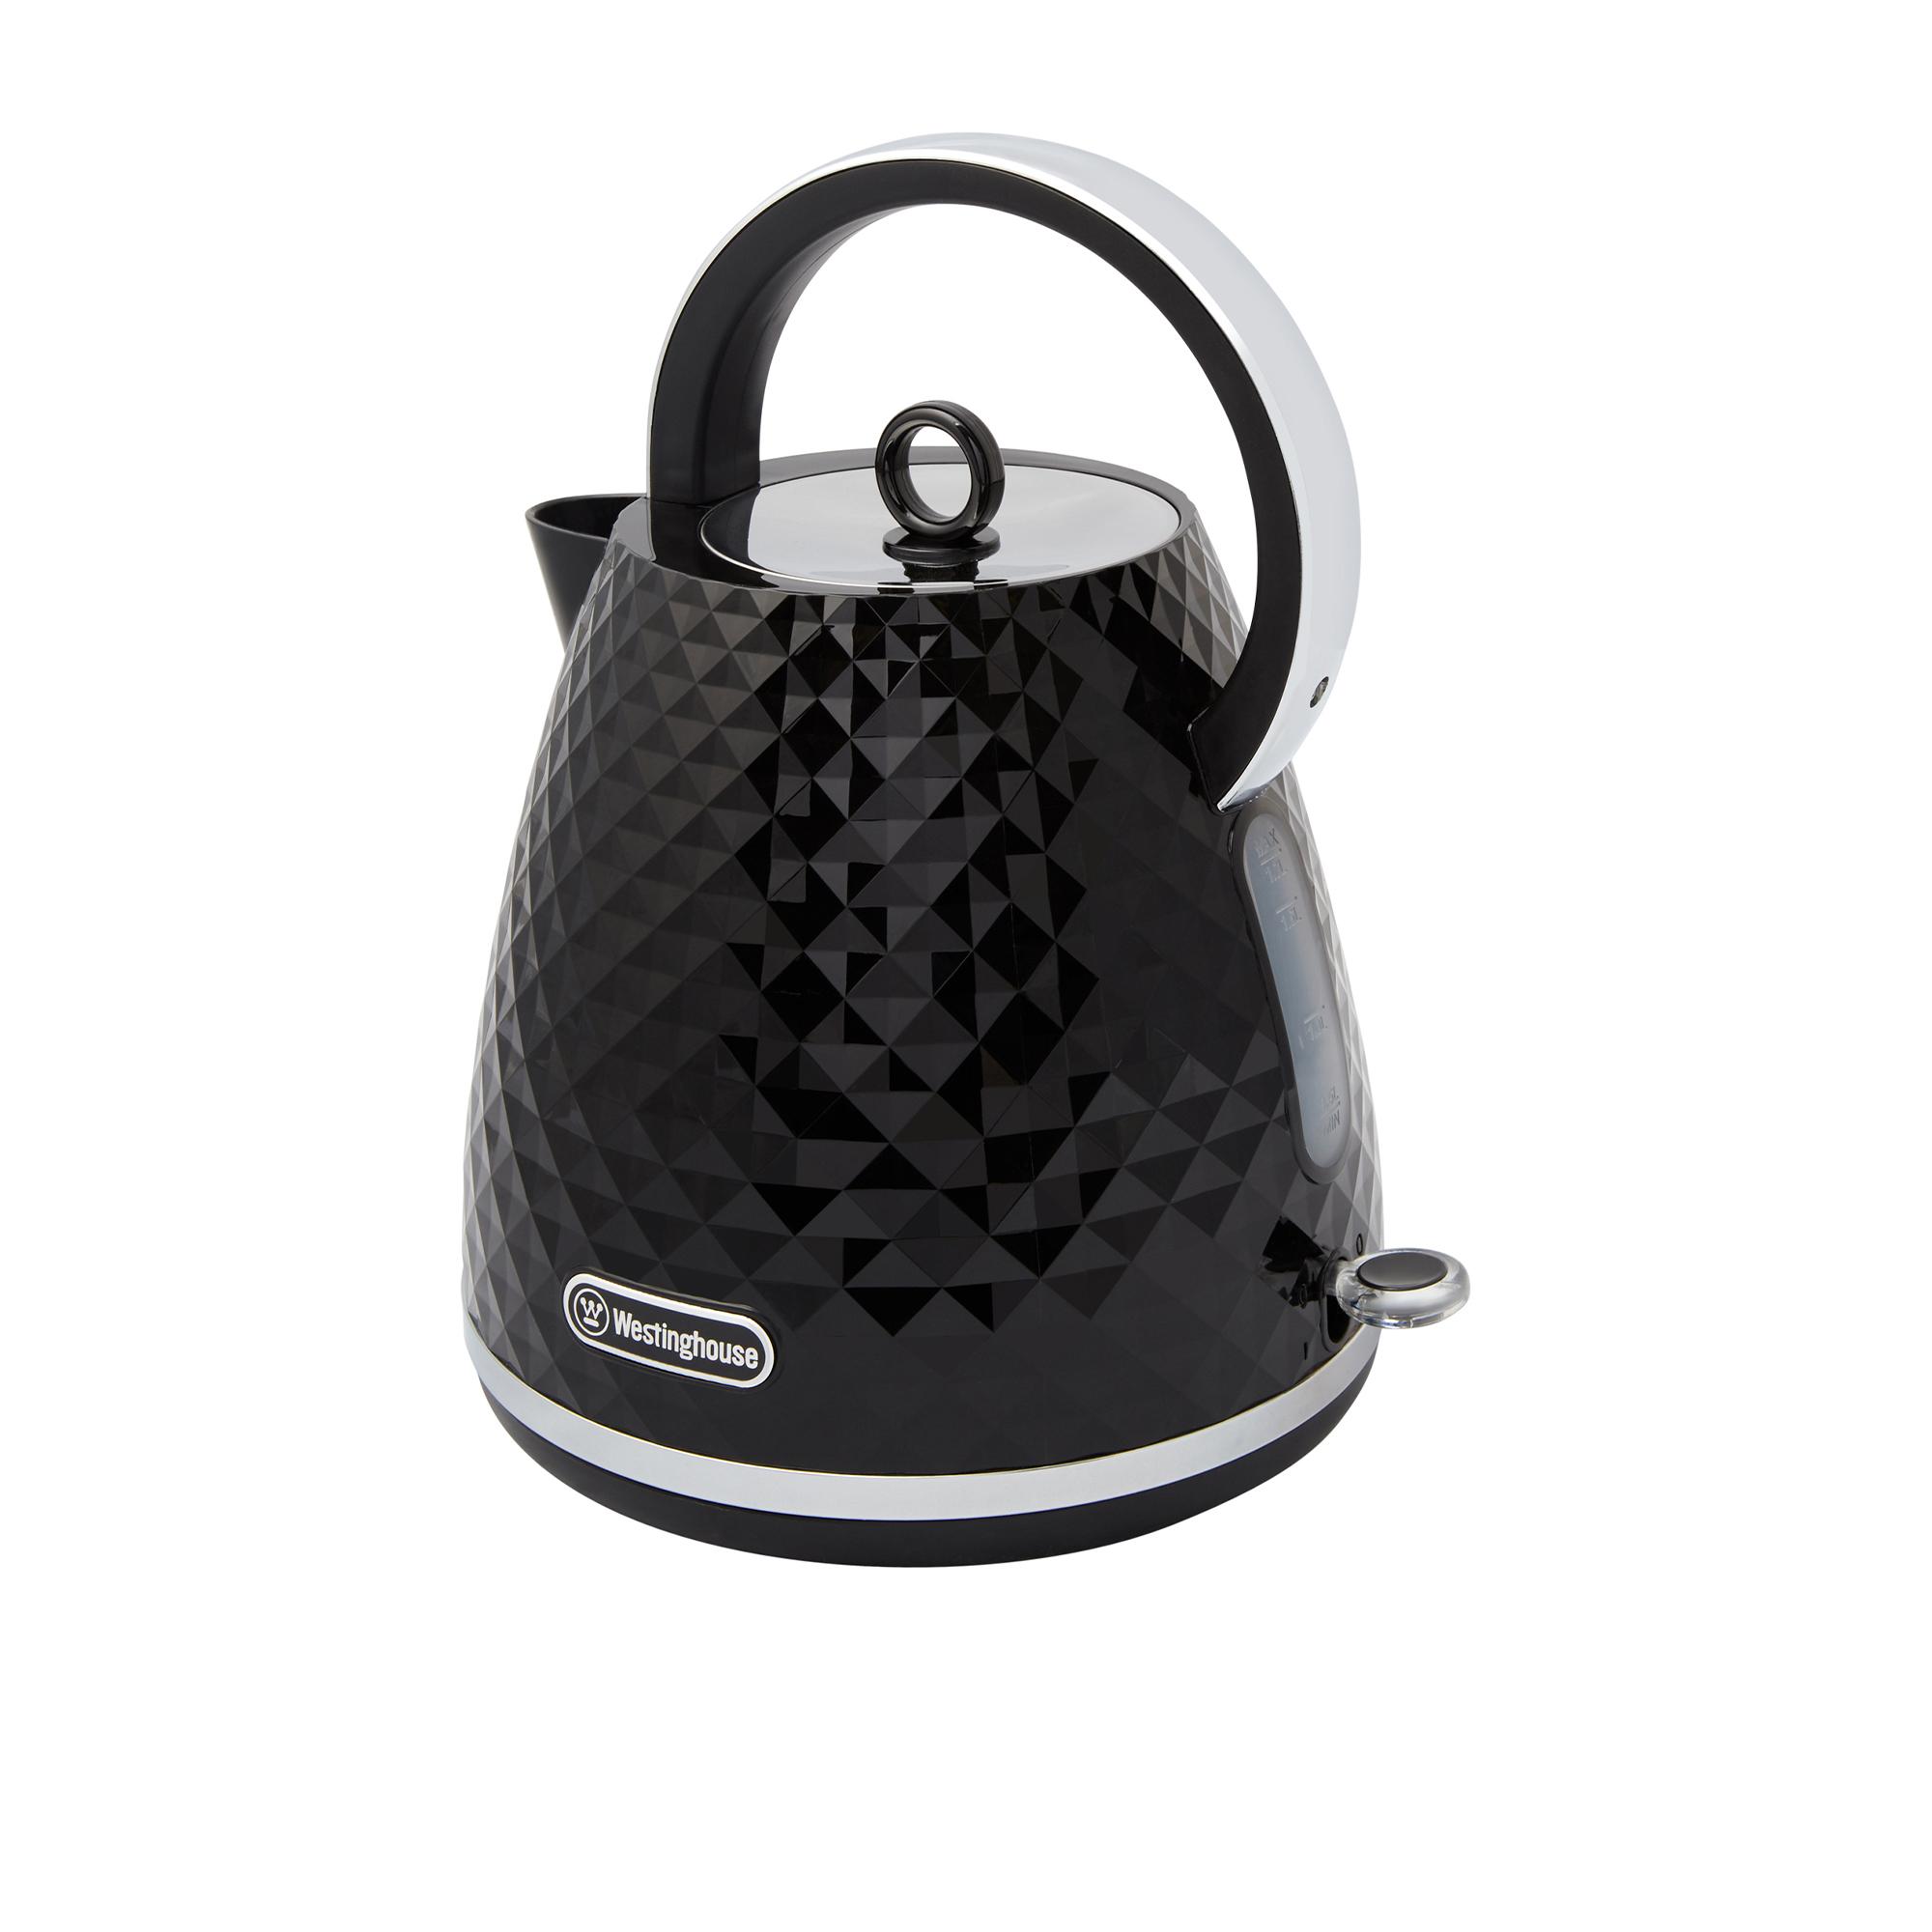 Westinghouse Kettle and Toaster Pack Black - Diamond Pattern Image 4